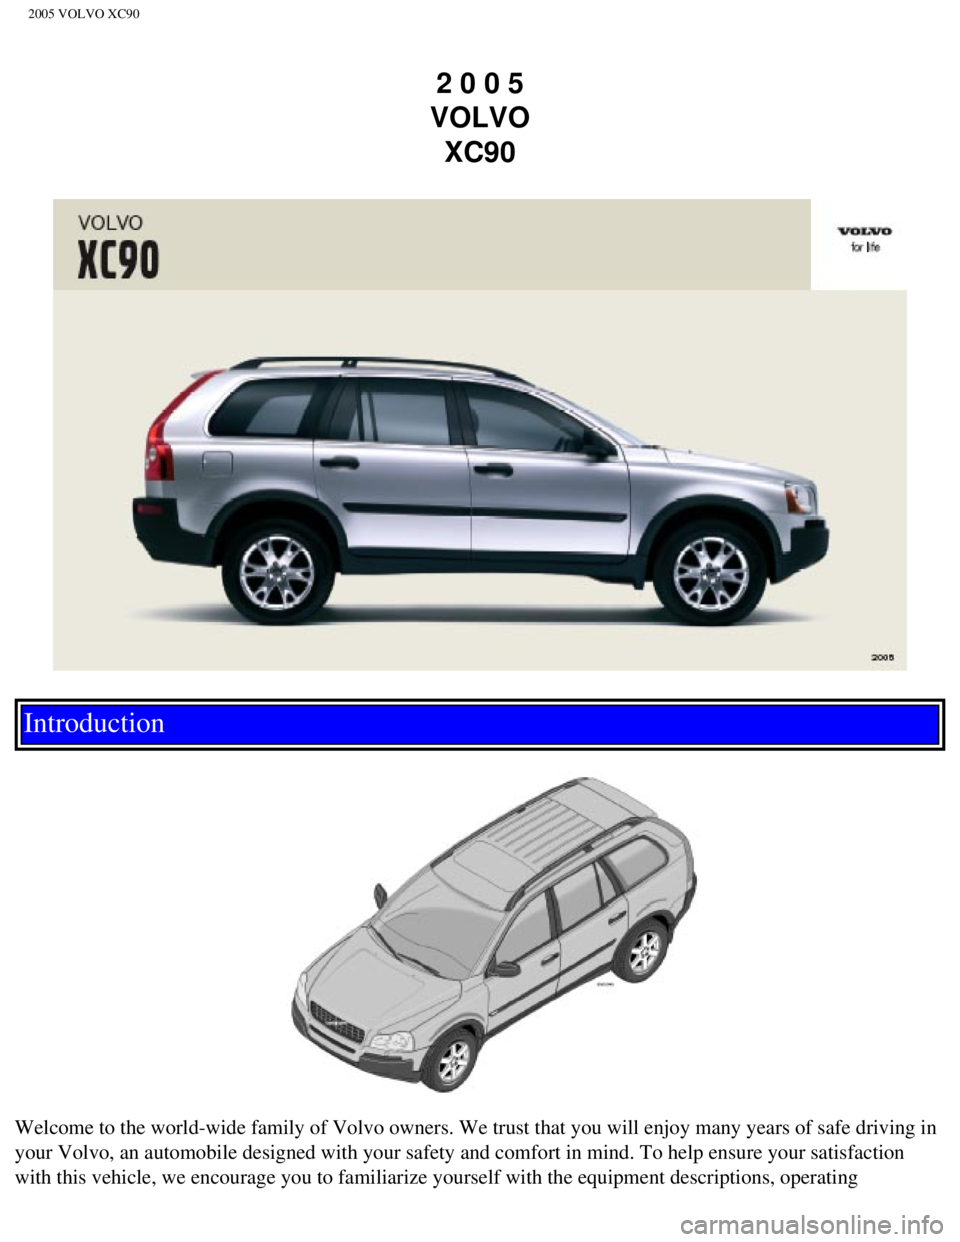 VOLVO XC90 2005  Owners Manual 
2005 VOLVO XC90
2 0 0 5  
VOLVO  XC90
Introduction 
 
 
Welcome to the world-wide family of Volvo owners. We trust that you will\
 enjoy many years of safe driving in 
your Volvo, an automobile desig